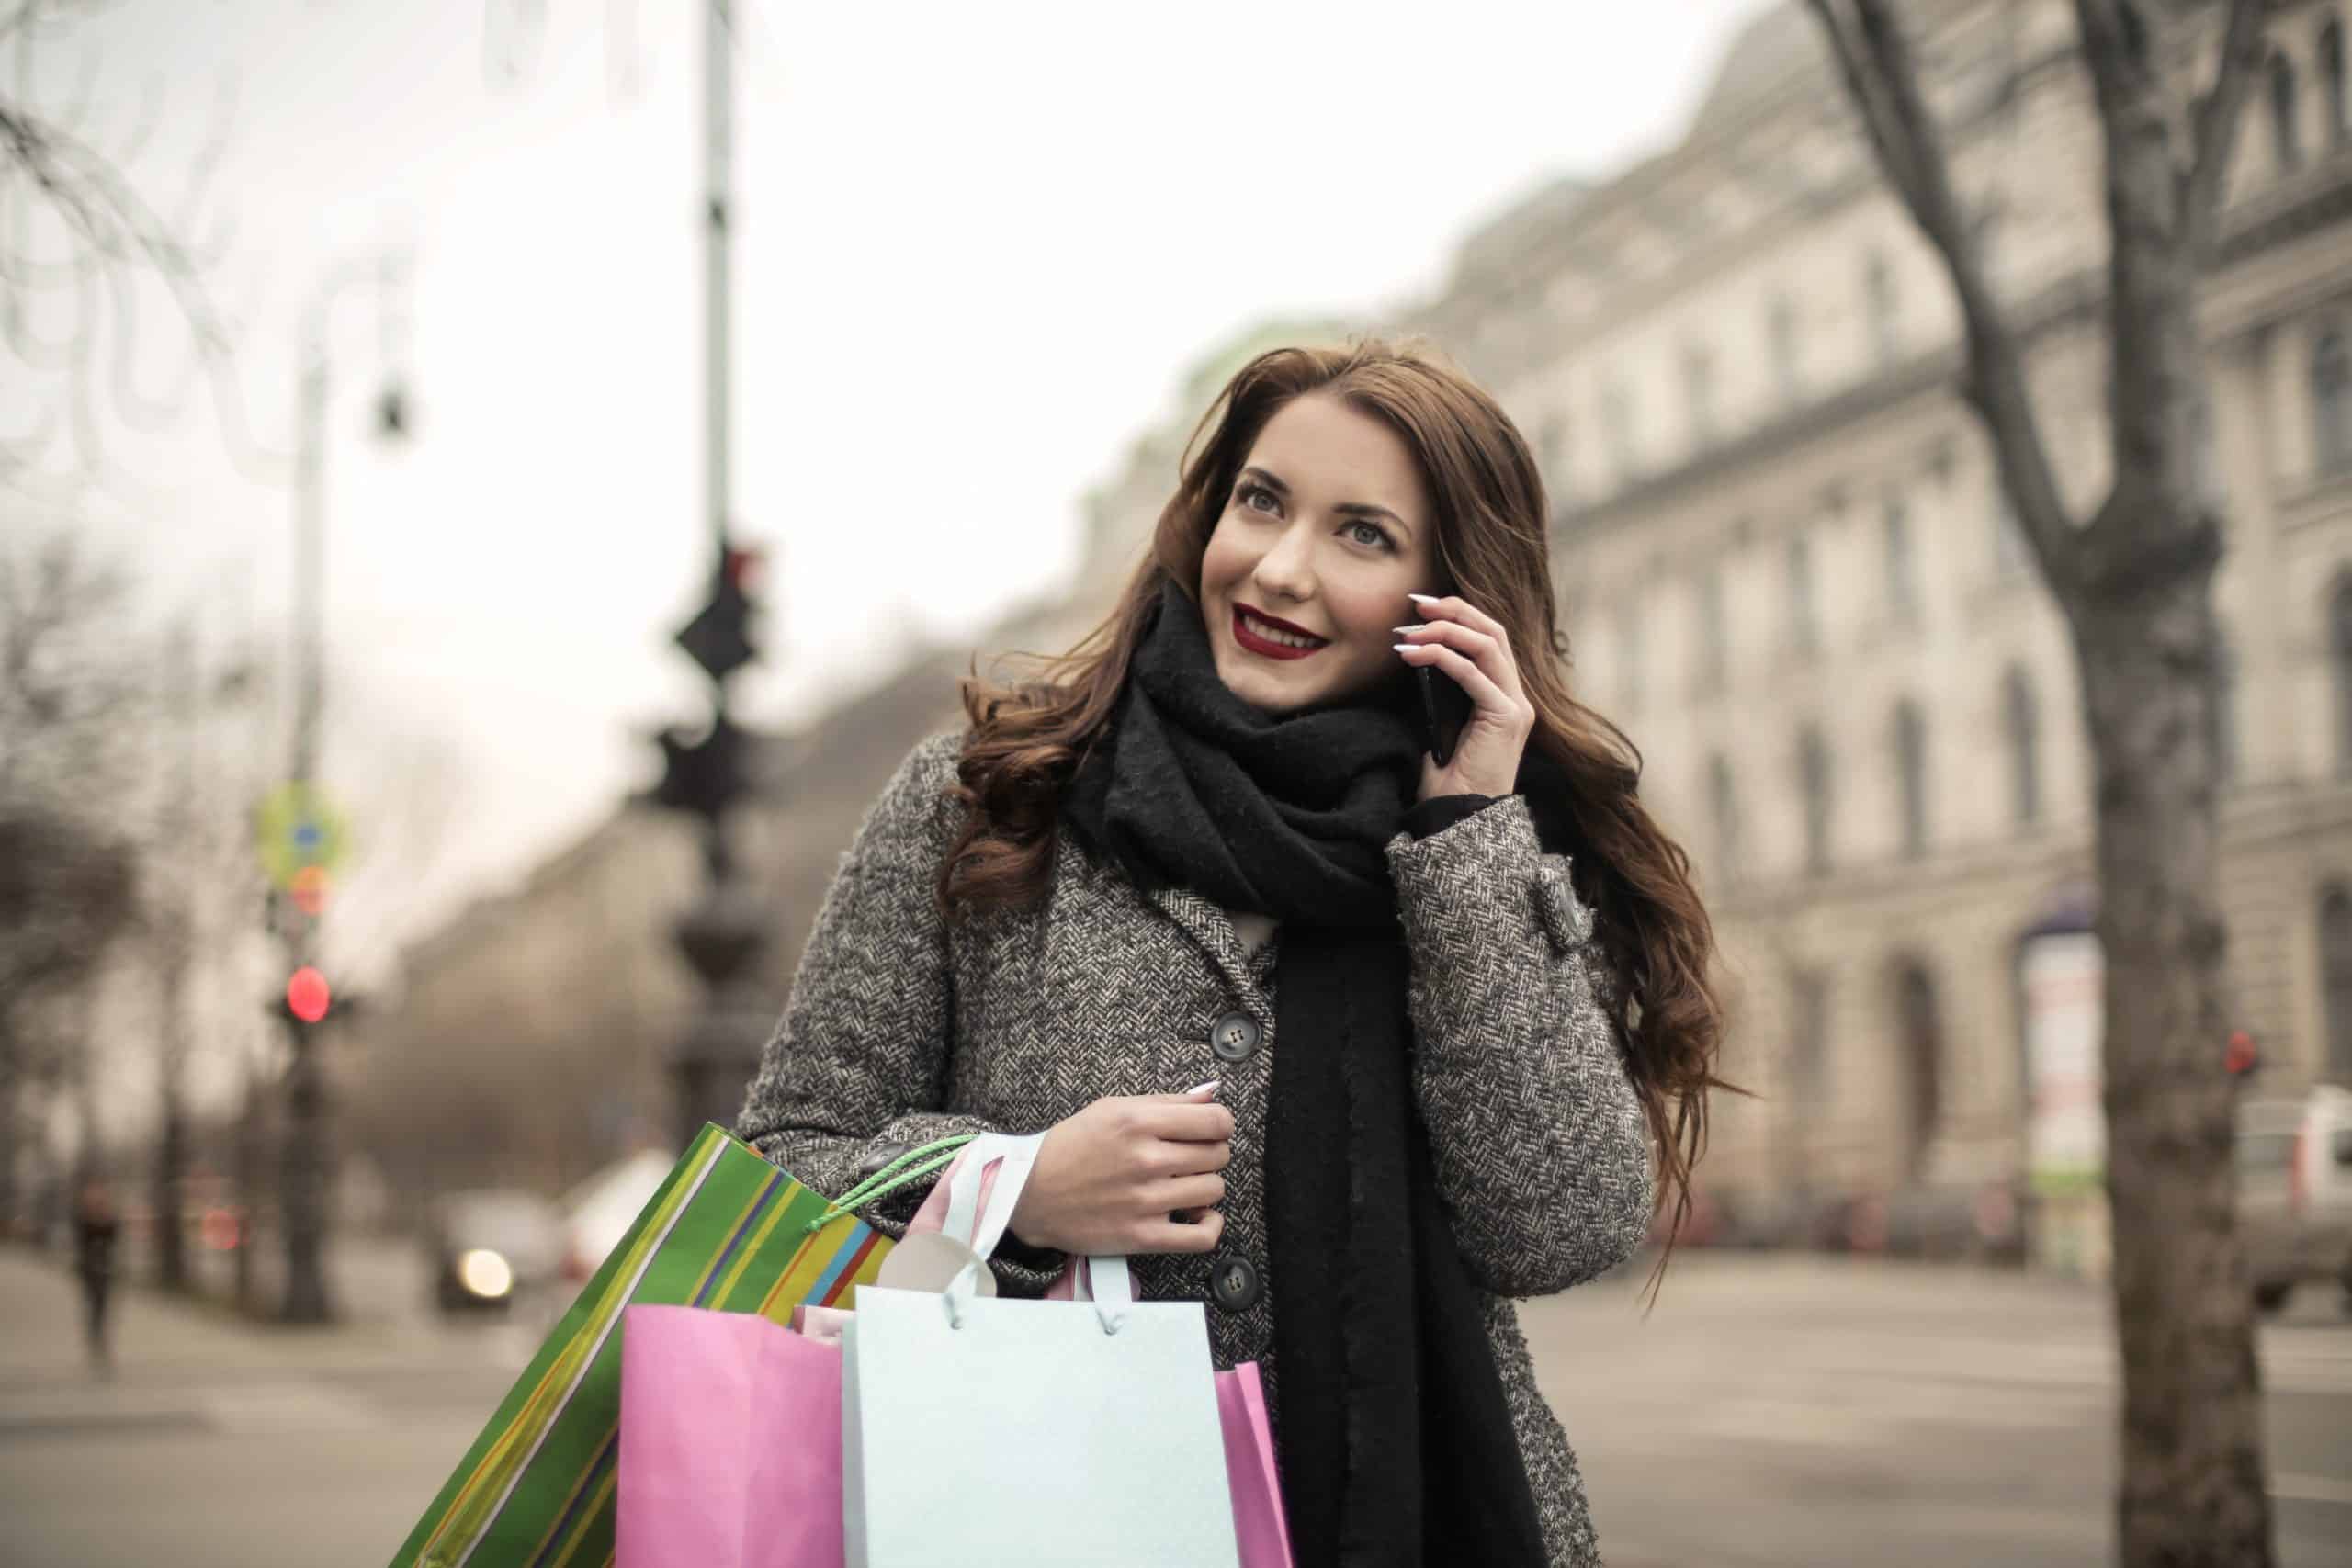 How do I know if a personal shopper is right for me